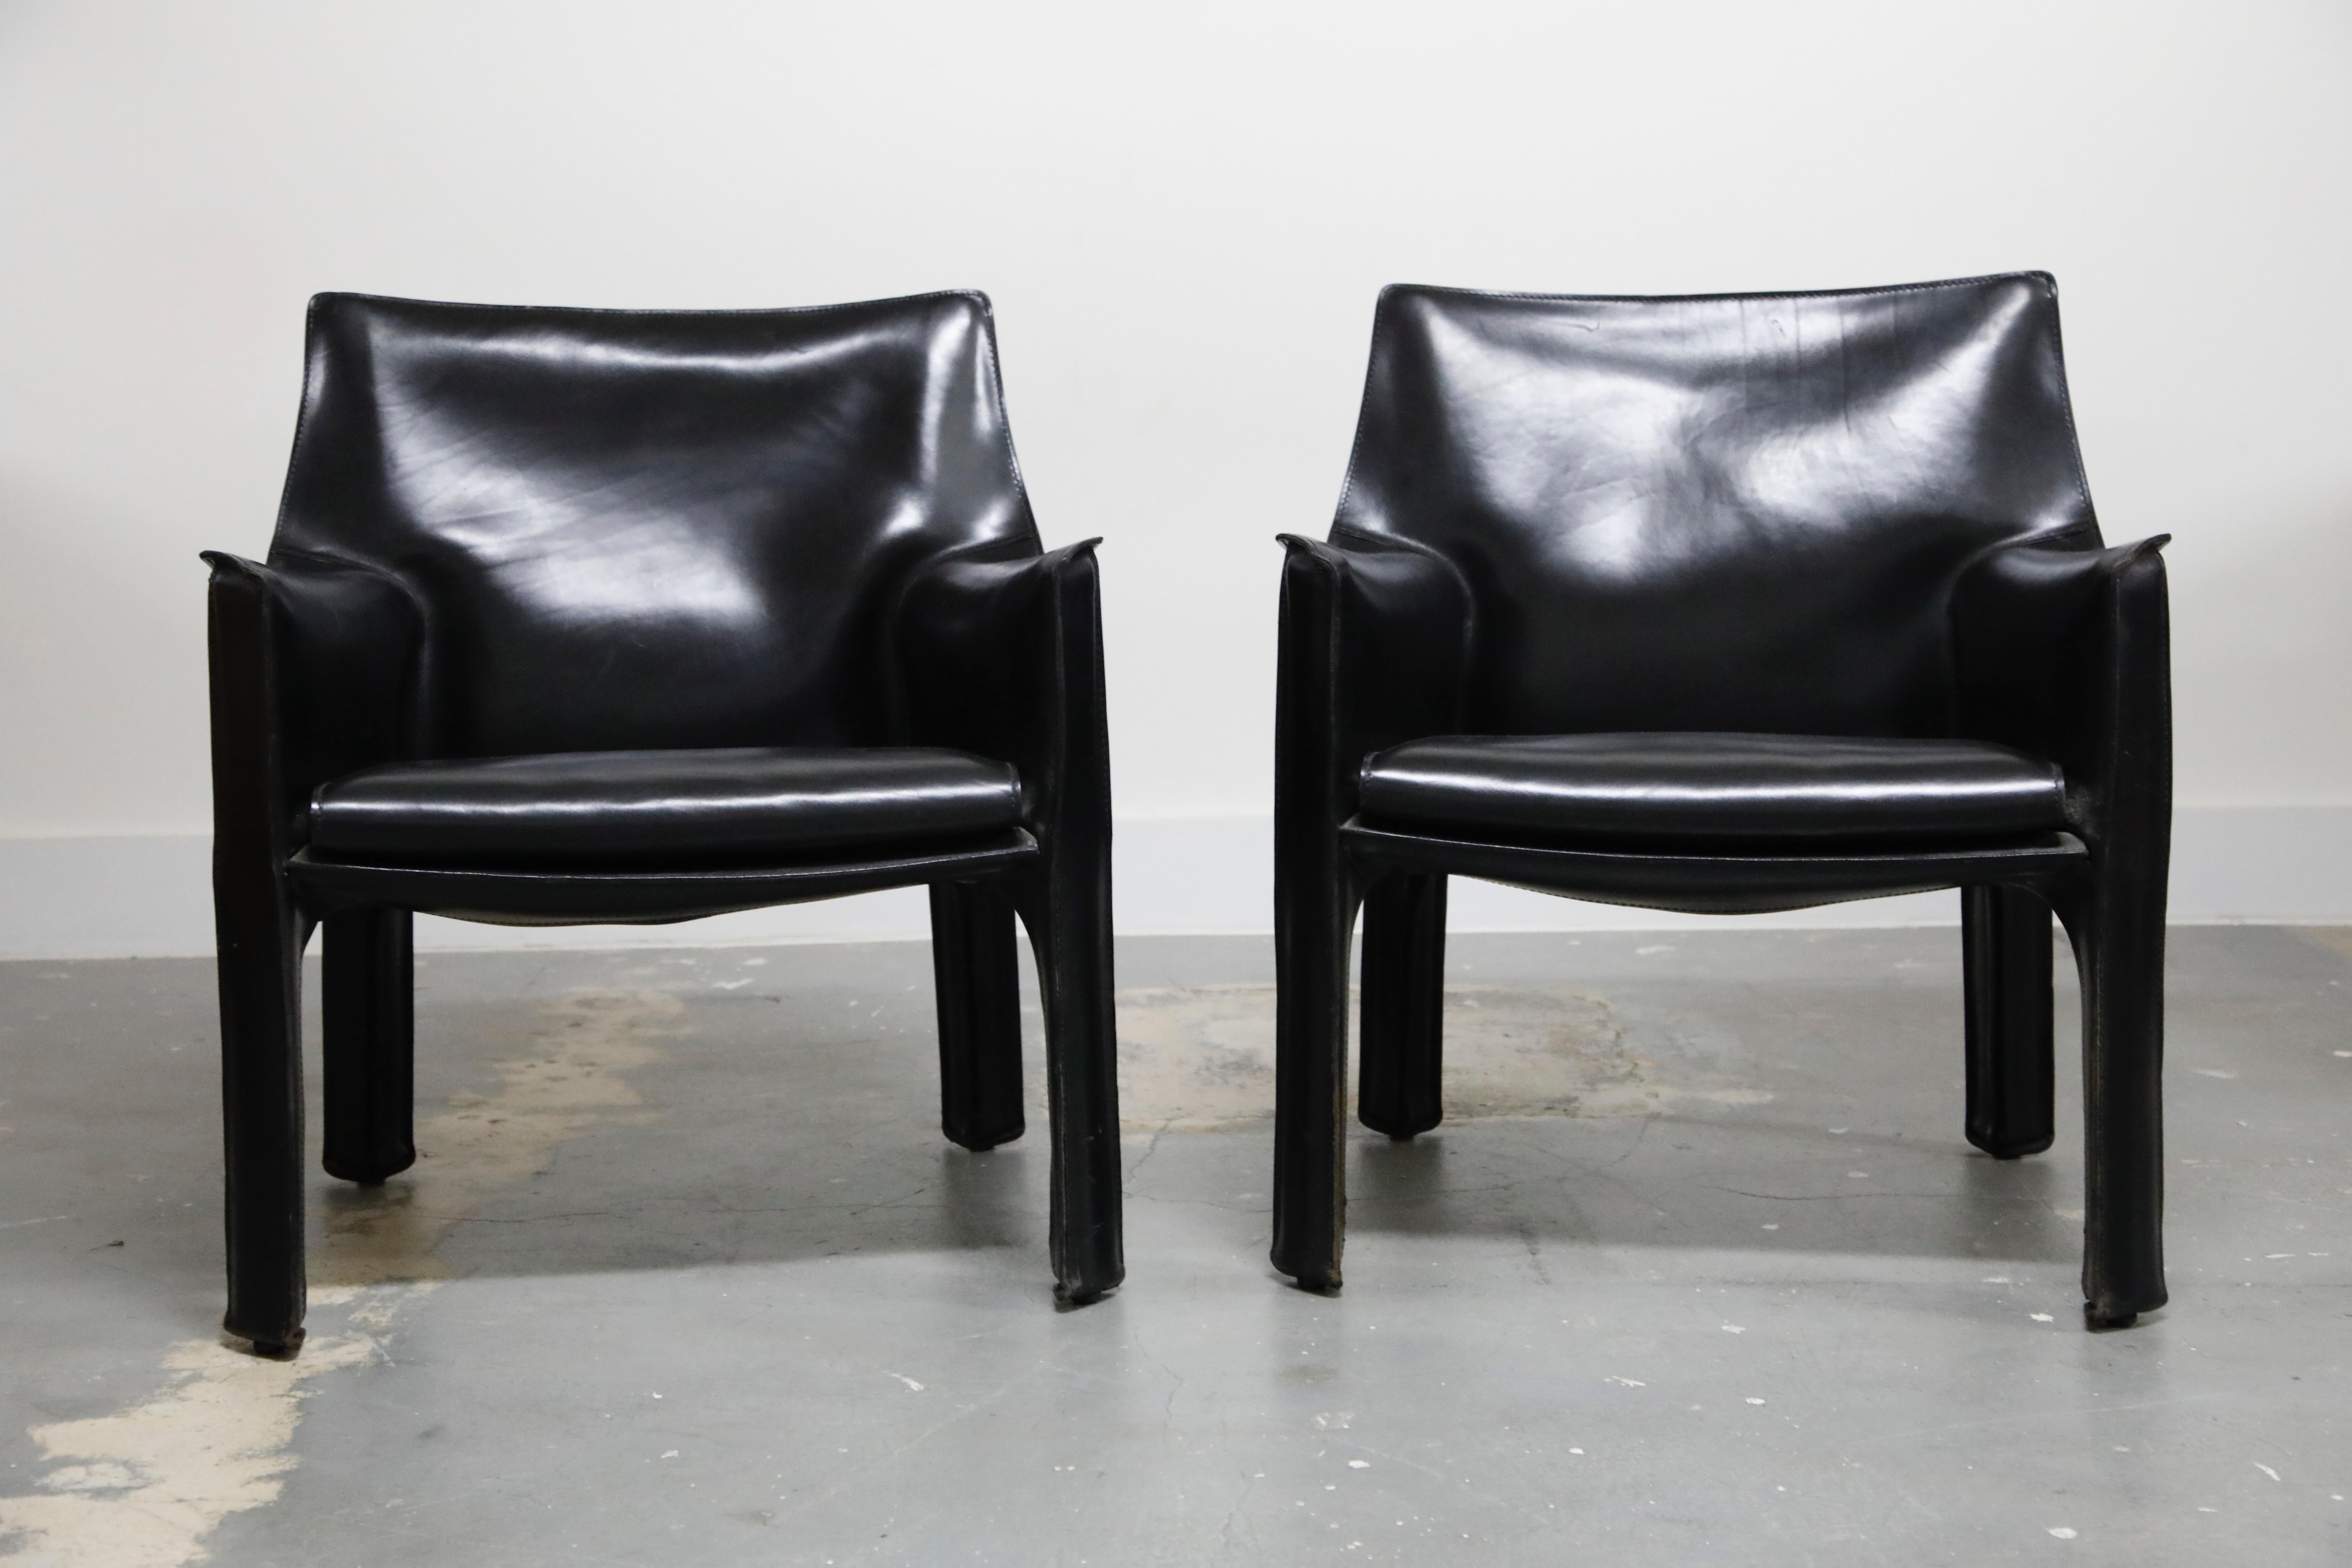 A beautiful pair of Mario Bellini Cab lounge chairs, Model #414, in exemplary condition, signed Cassina, designed in the 1970s. These fine examples of the cab line by Mario Bellini for Cassina are Classic staples for luxury interior designers and